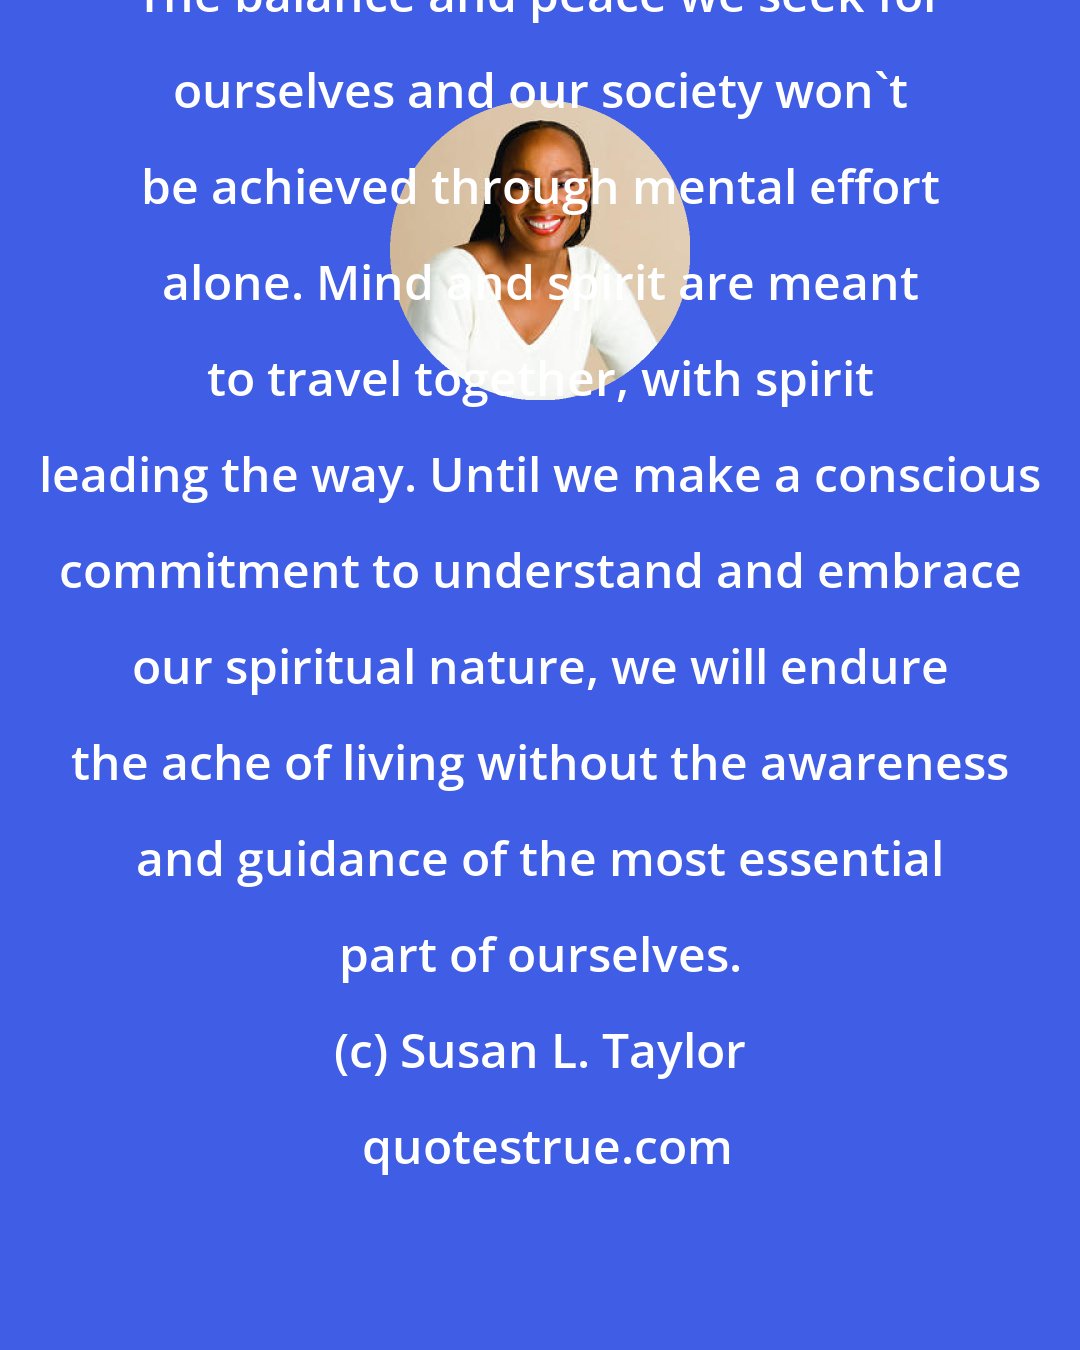 Susan L. Taylor: The balance and peace we seek for ourselves and our society won't be achieved through mental effort alone. Mind and spirit are meant to travel together, with spirit leading the way. Until we make a conscious commitment to understand and embrace our spiritual nature, we will endure the ache of living without the awareness and guidance of the most essential part of ourselves.